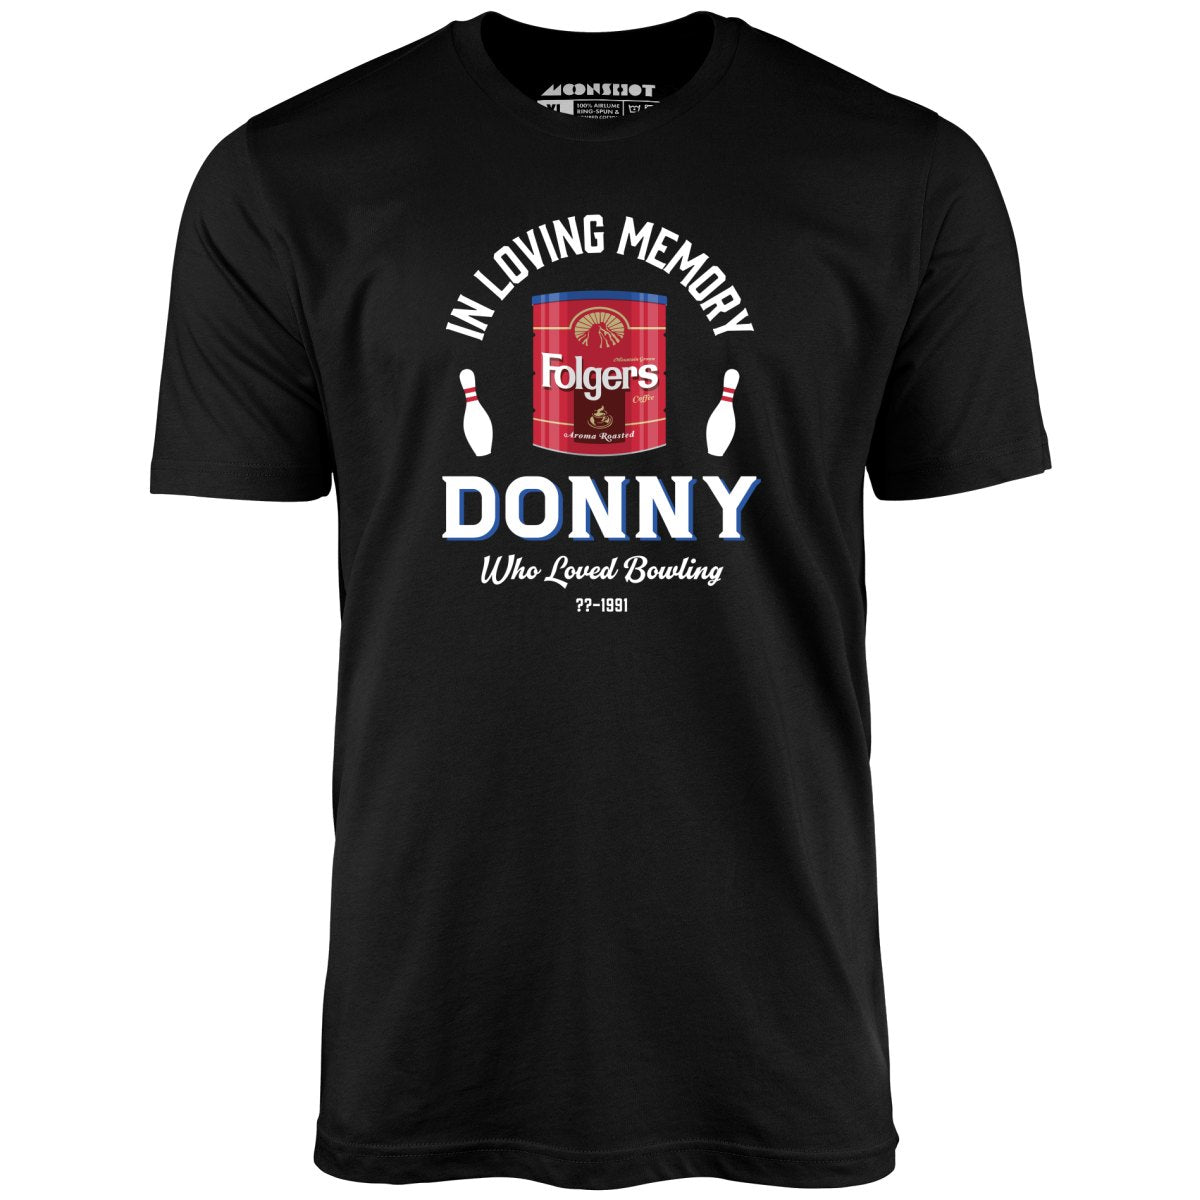 Donny Who Loved Bowling - Unisex T-Shirt